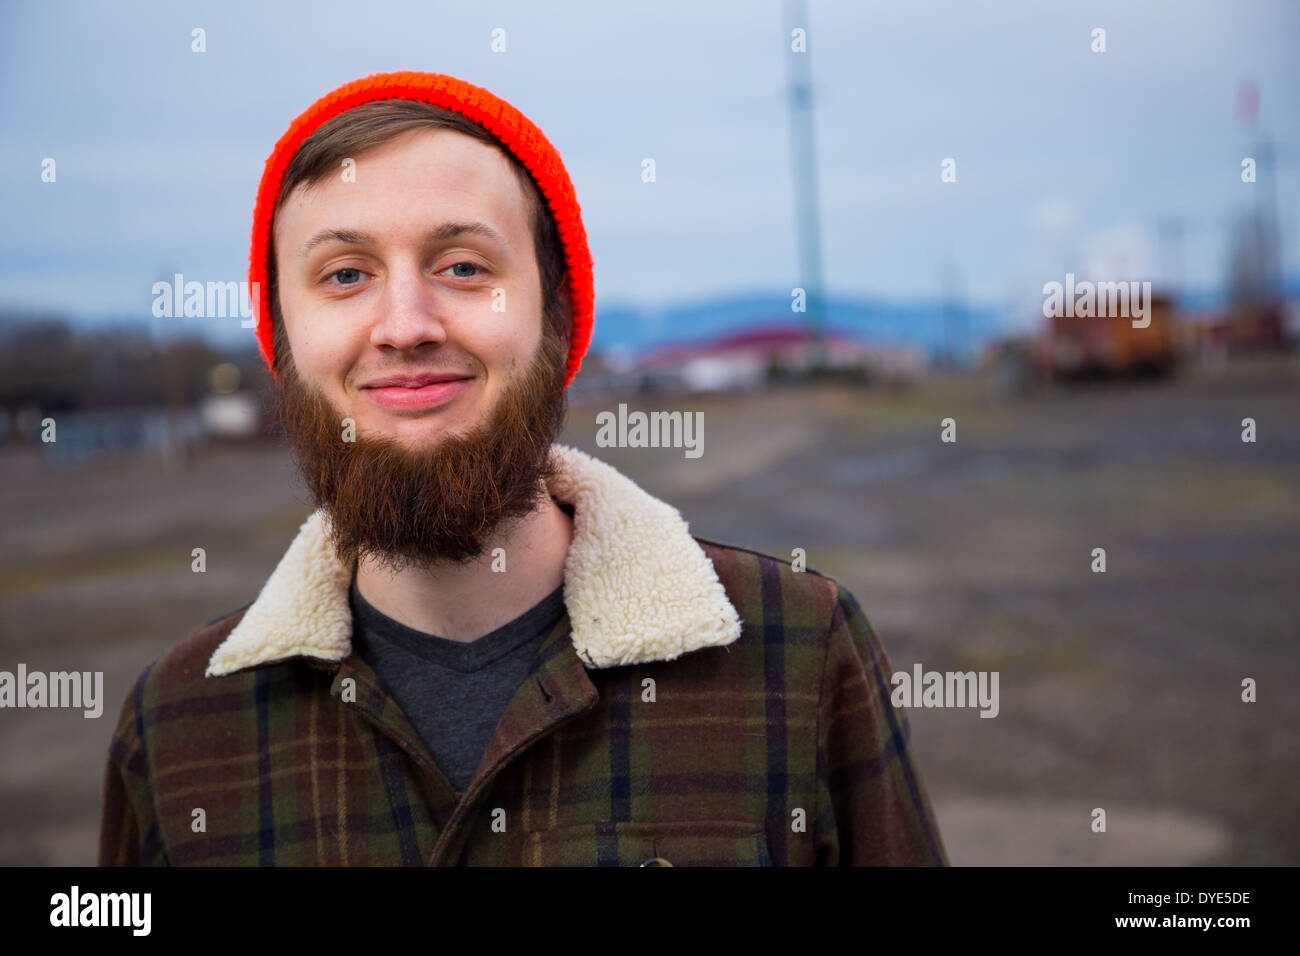 Modern, trendy, hipster guy in an abandoned train yard at dusk in this fashion style portrait. Stock Photo